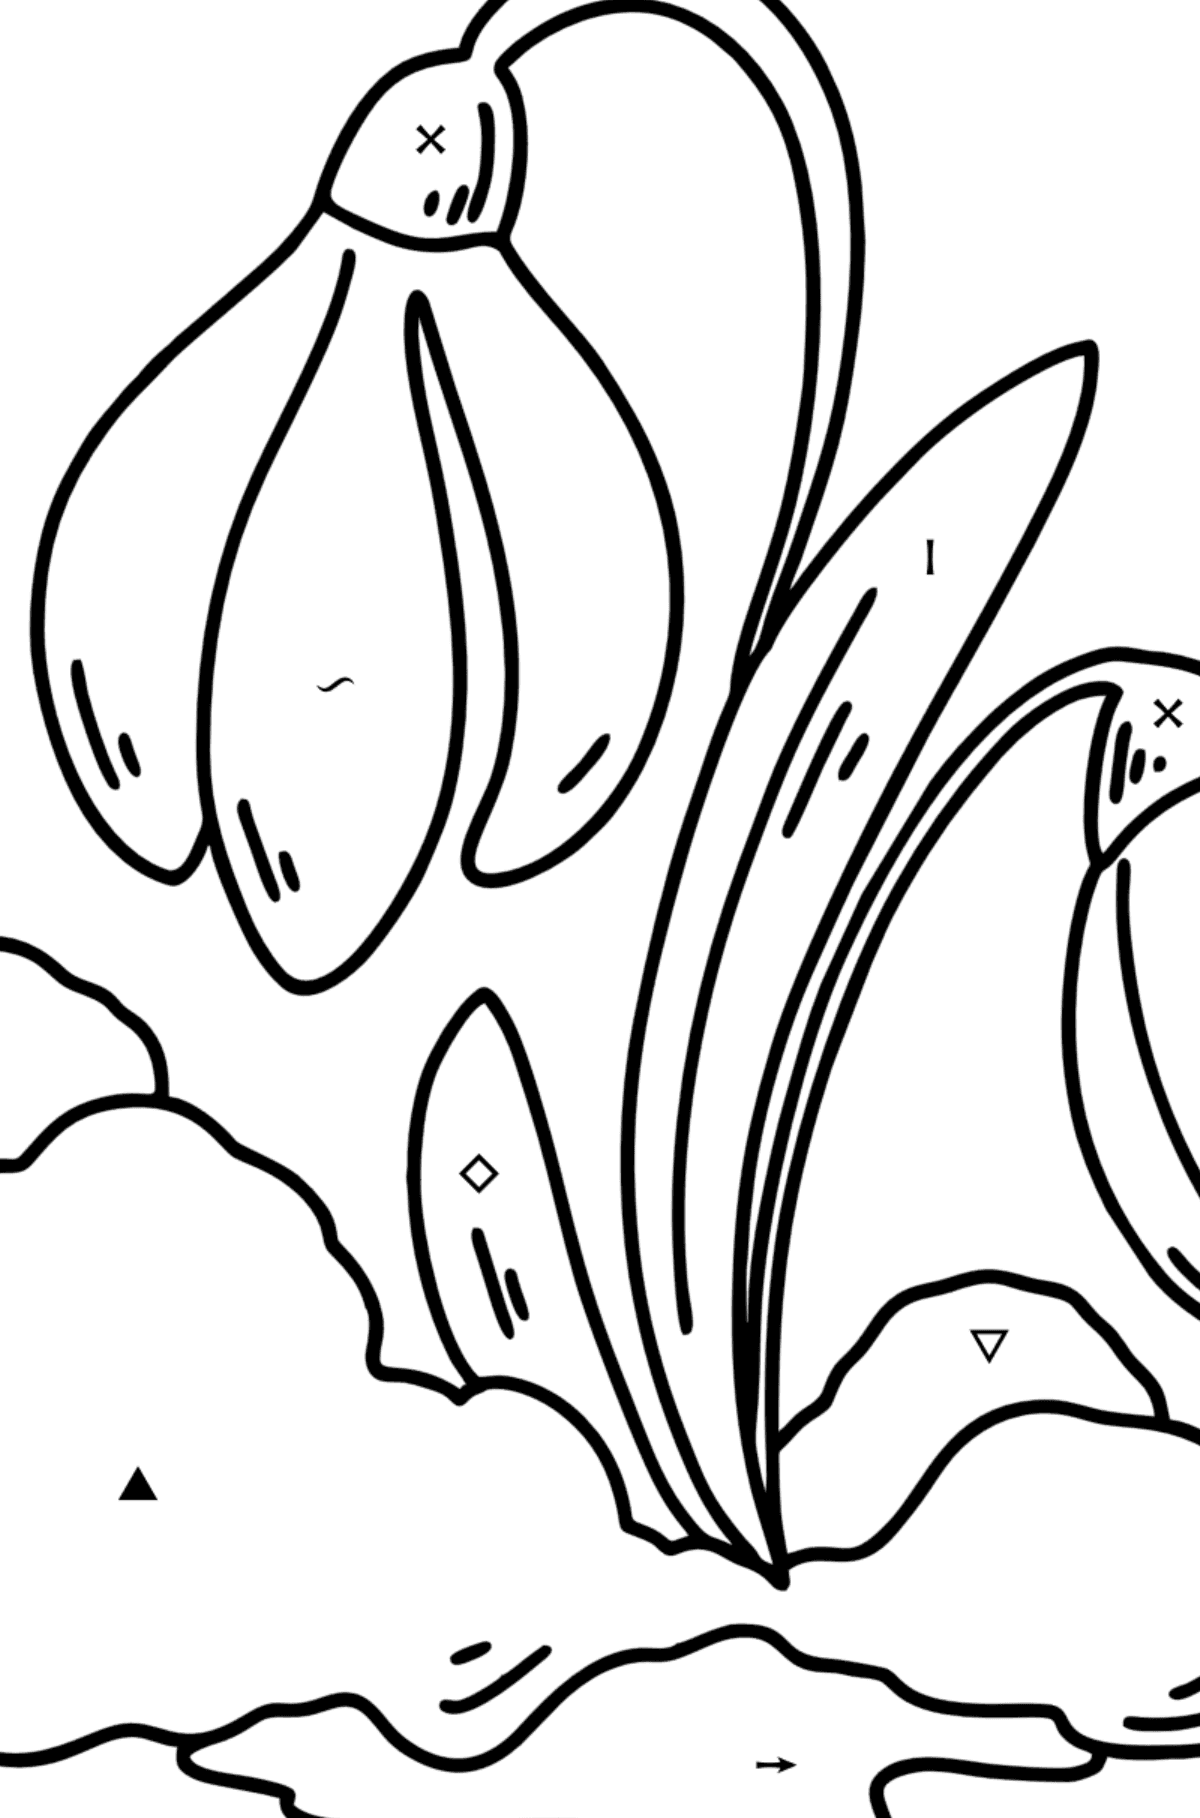 Spring Snowdrops coloring page - Coloring by Symbols for Kids